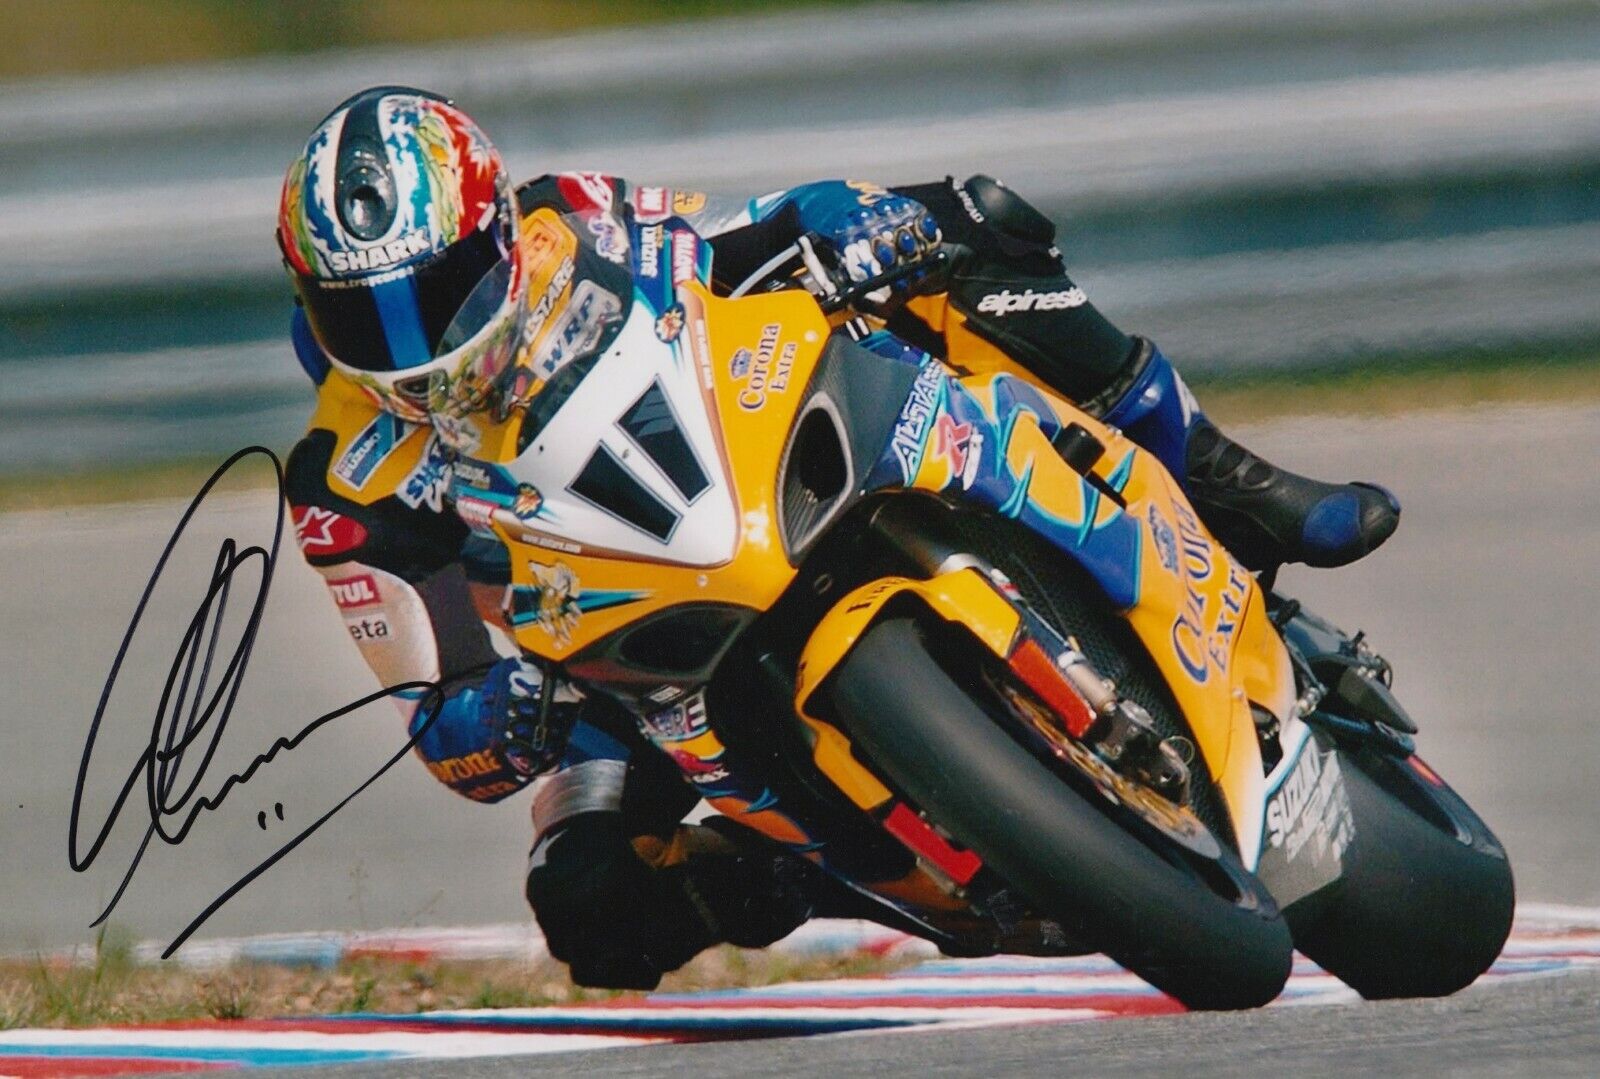 Troy Corser Hand Signed 12x8 Photo Poster painting - Suzuki Autograph 2.